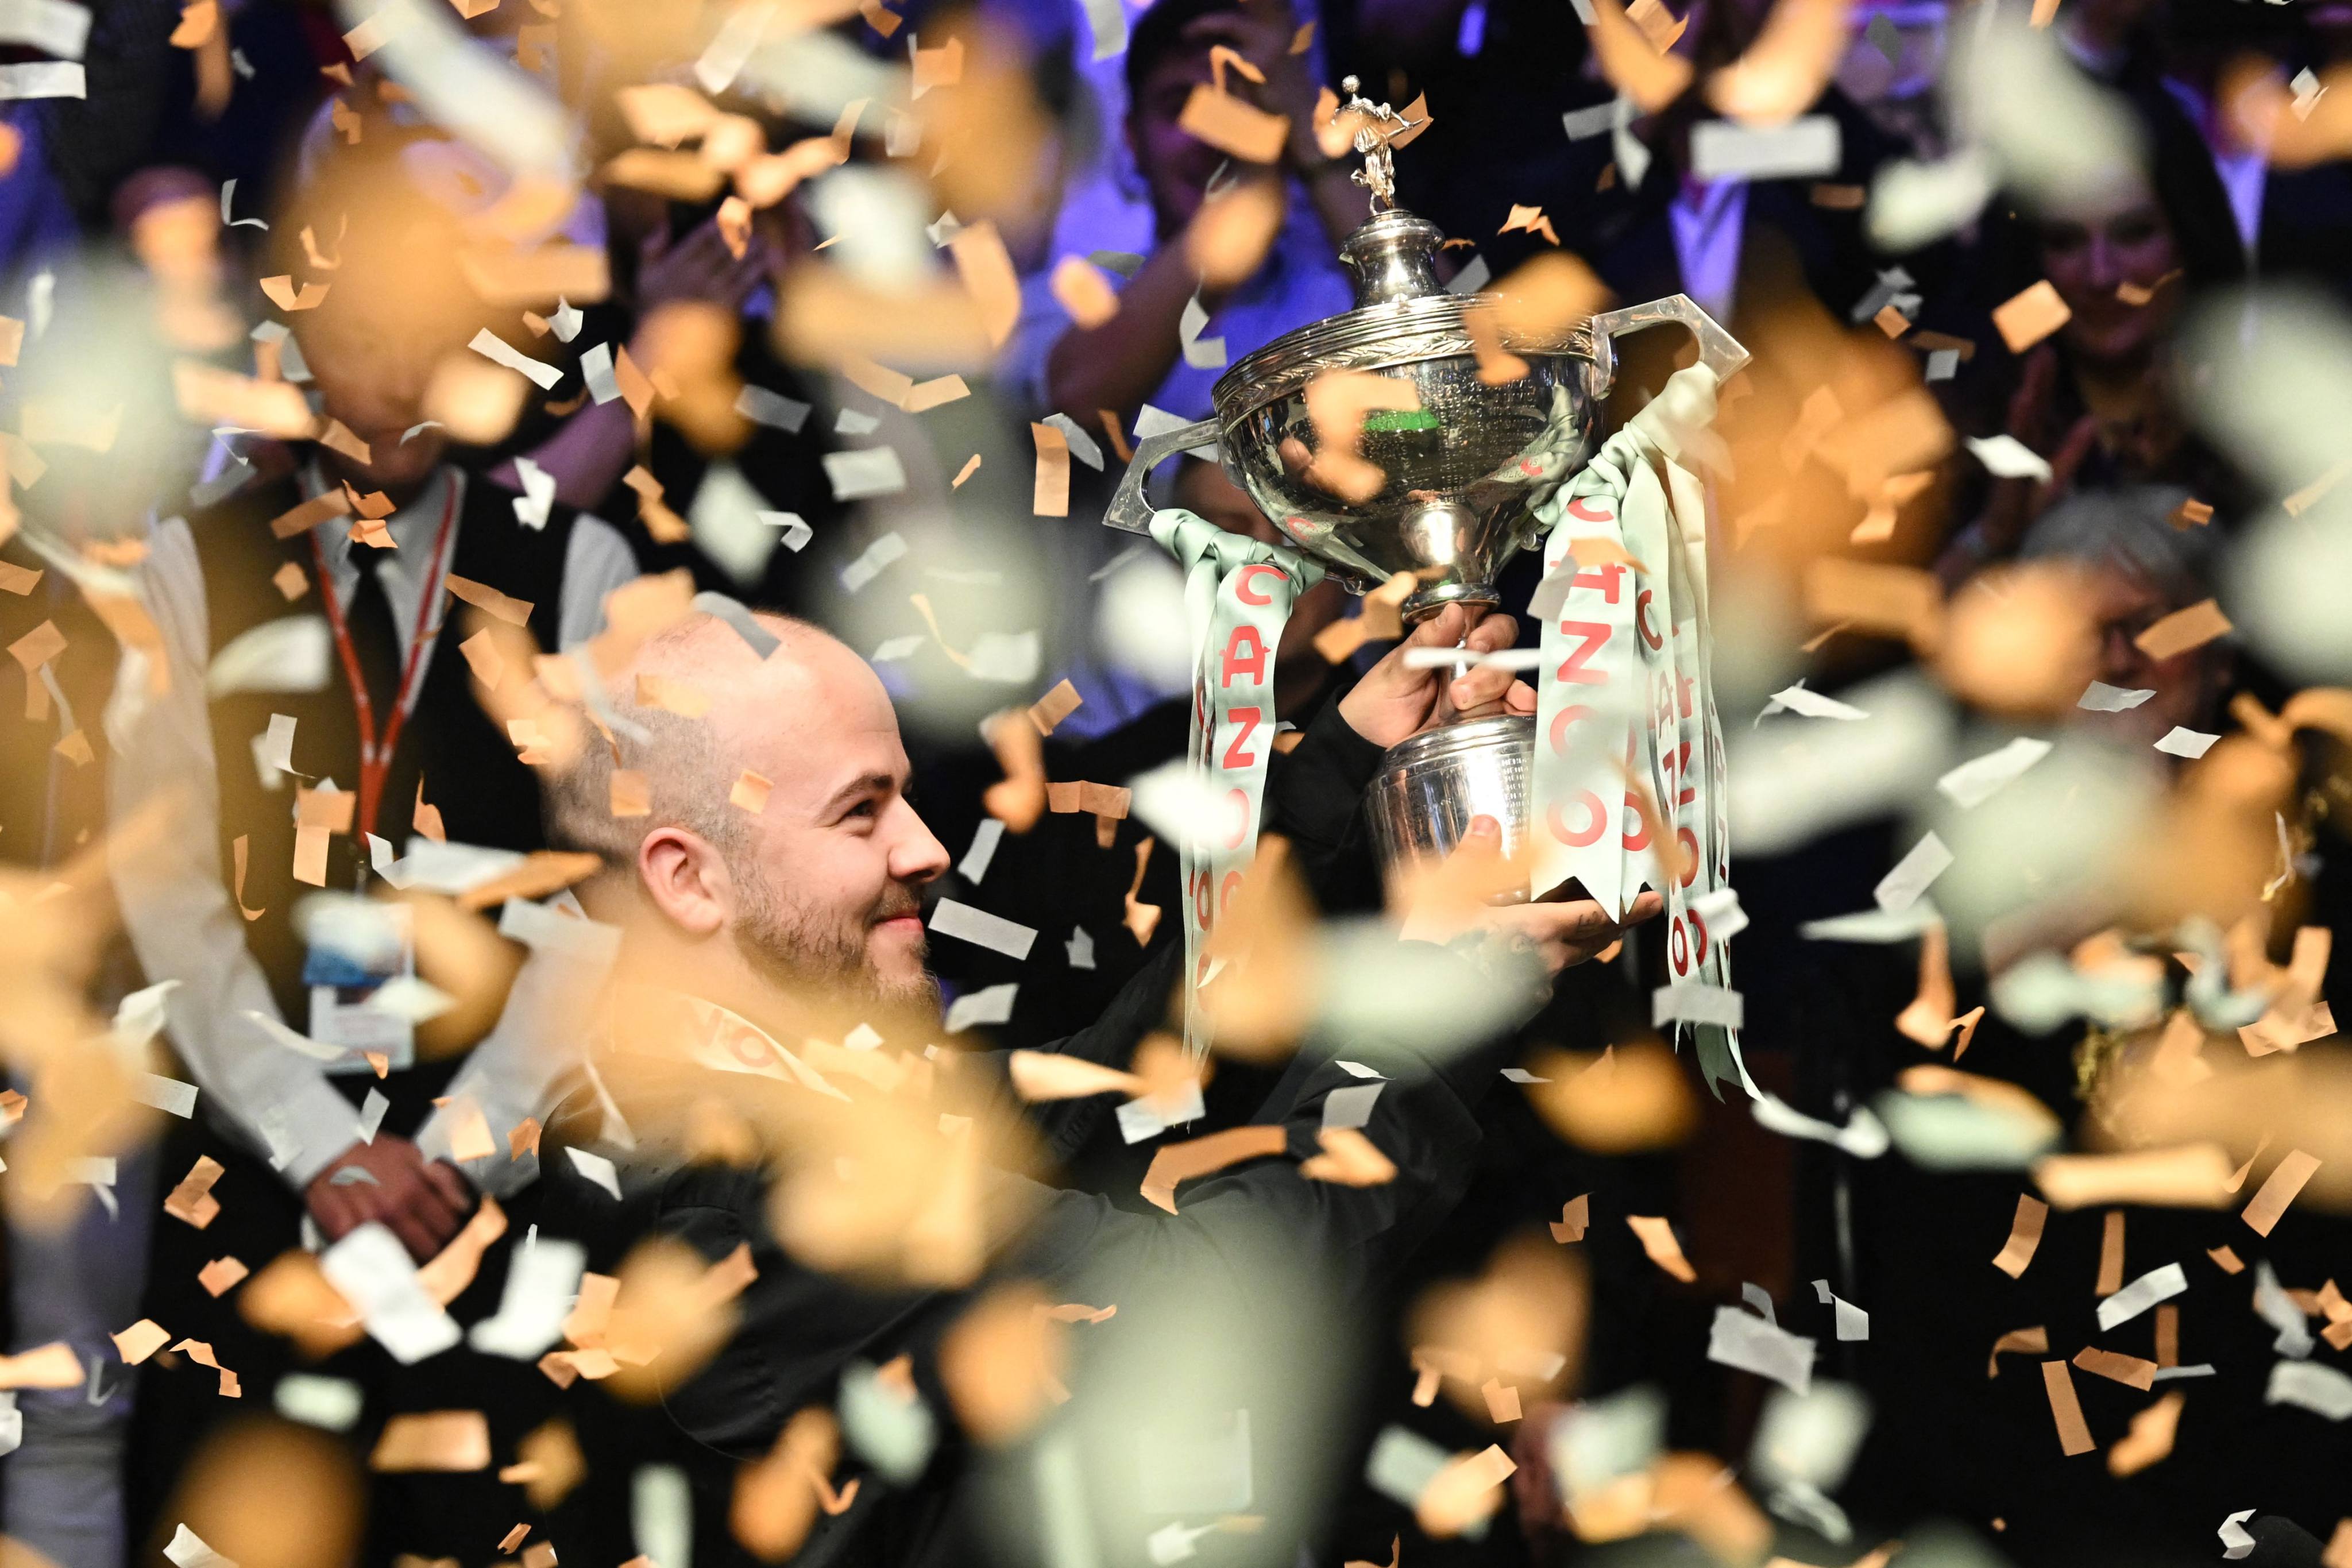 Belgium’s Luca Brecel celebrates with the trophy after winning the World Championship at the Crucible. Photo: AFP